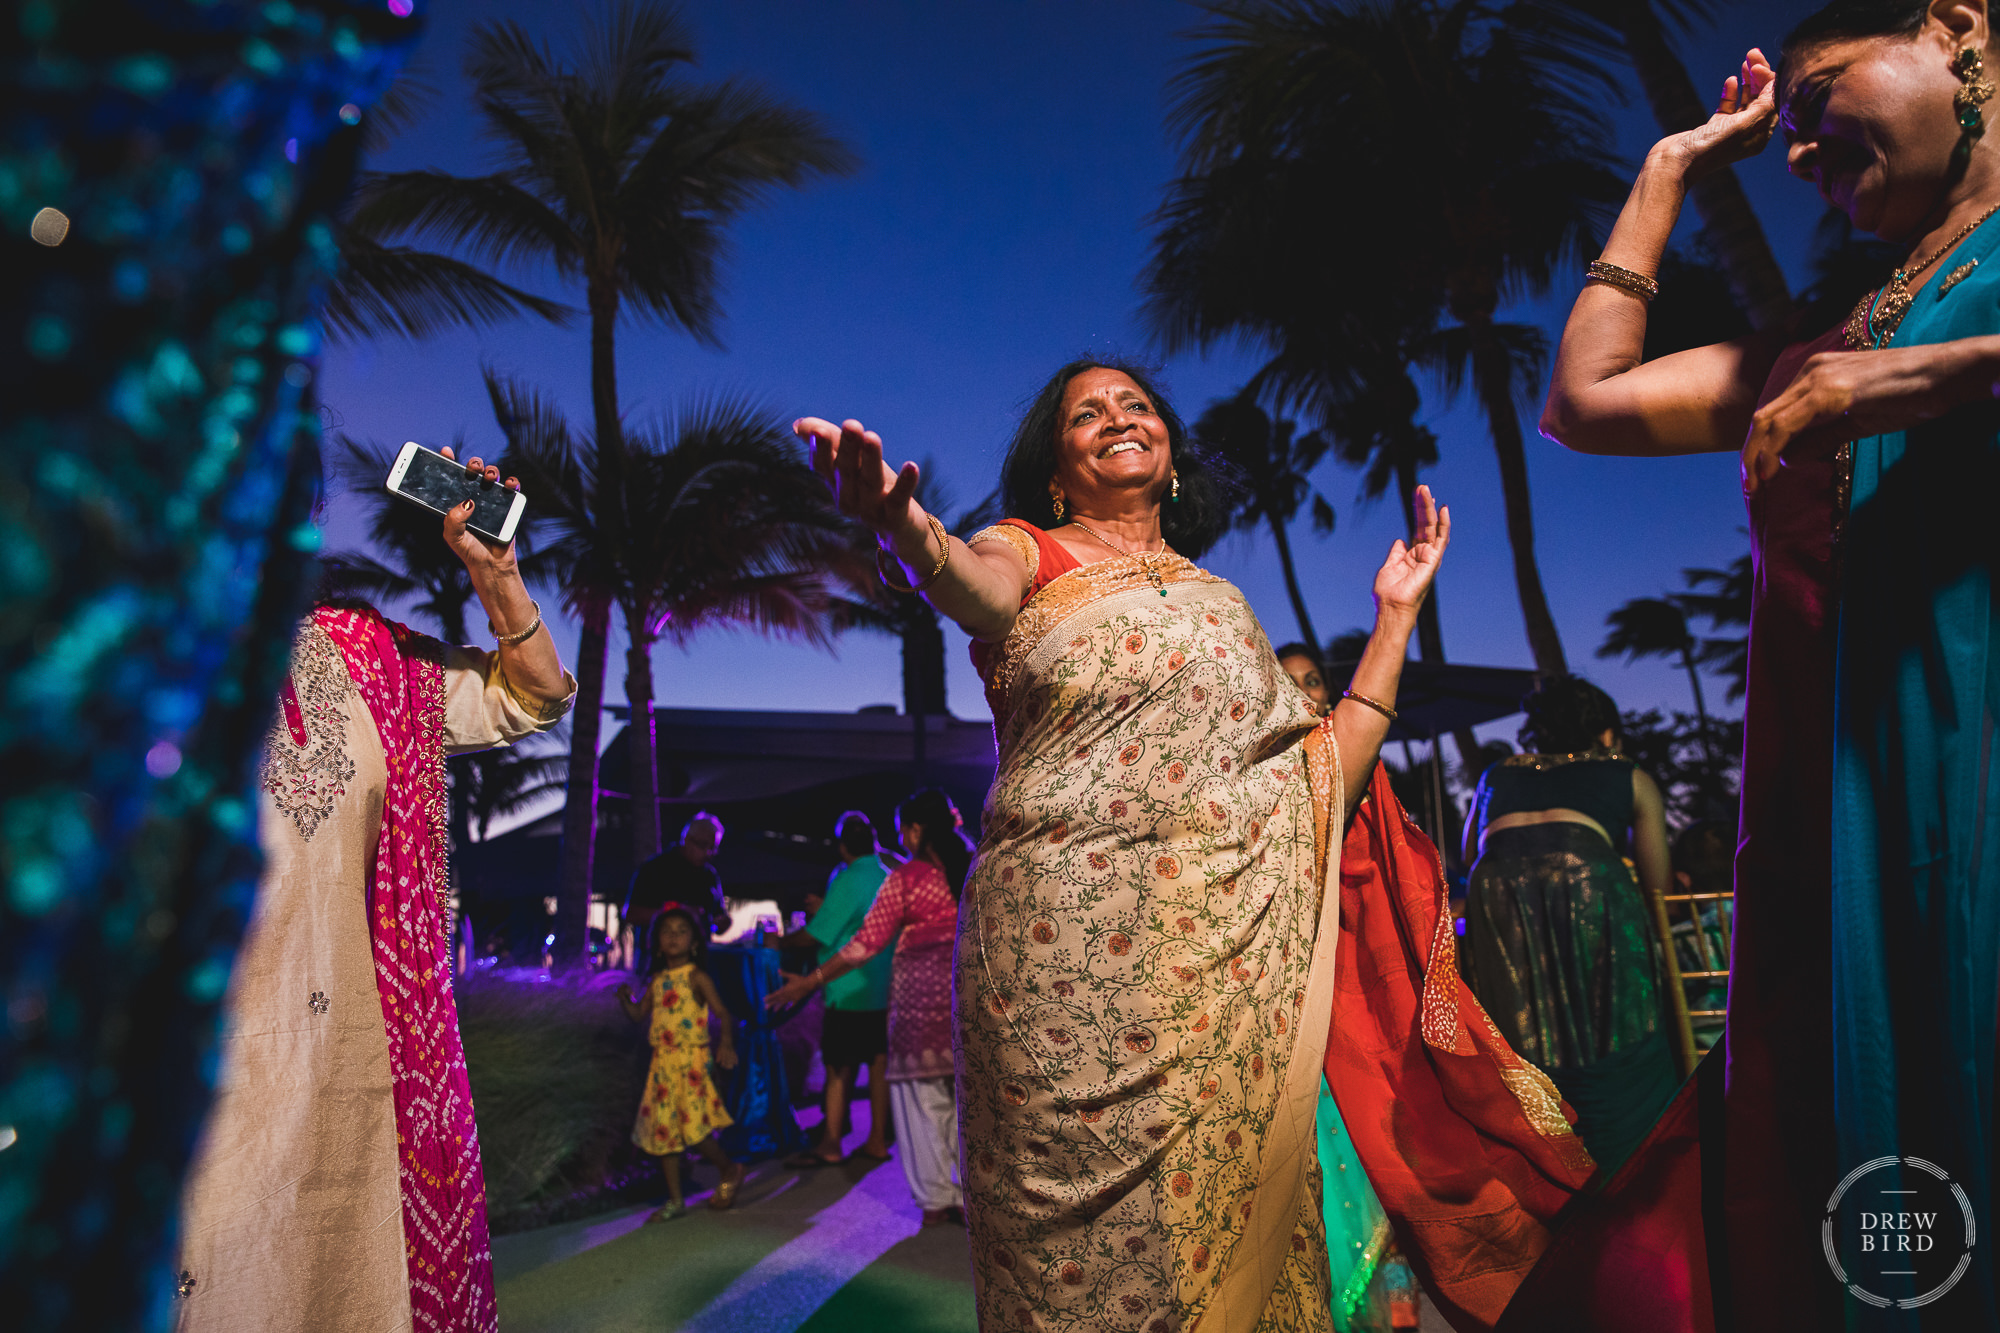 A group of women in traditional Indian wedding attire dance together at sunset. A professional wedding photography story about a Hindu destination wedding at the Hilton Aruba Resort by wedding photographer Drew Bird.